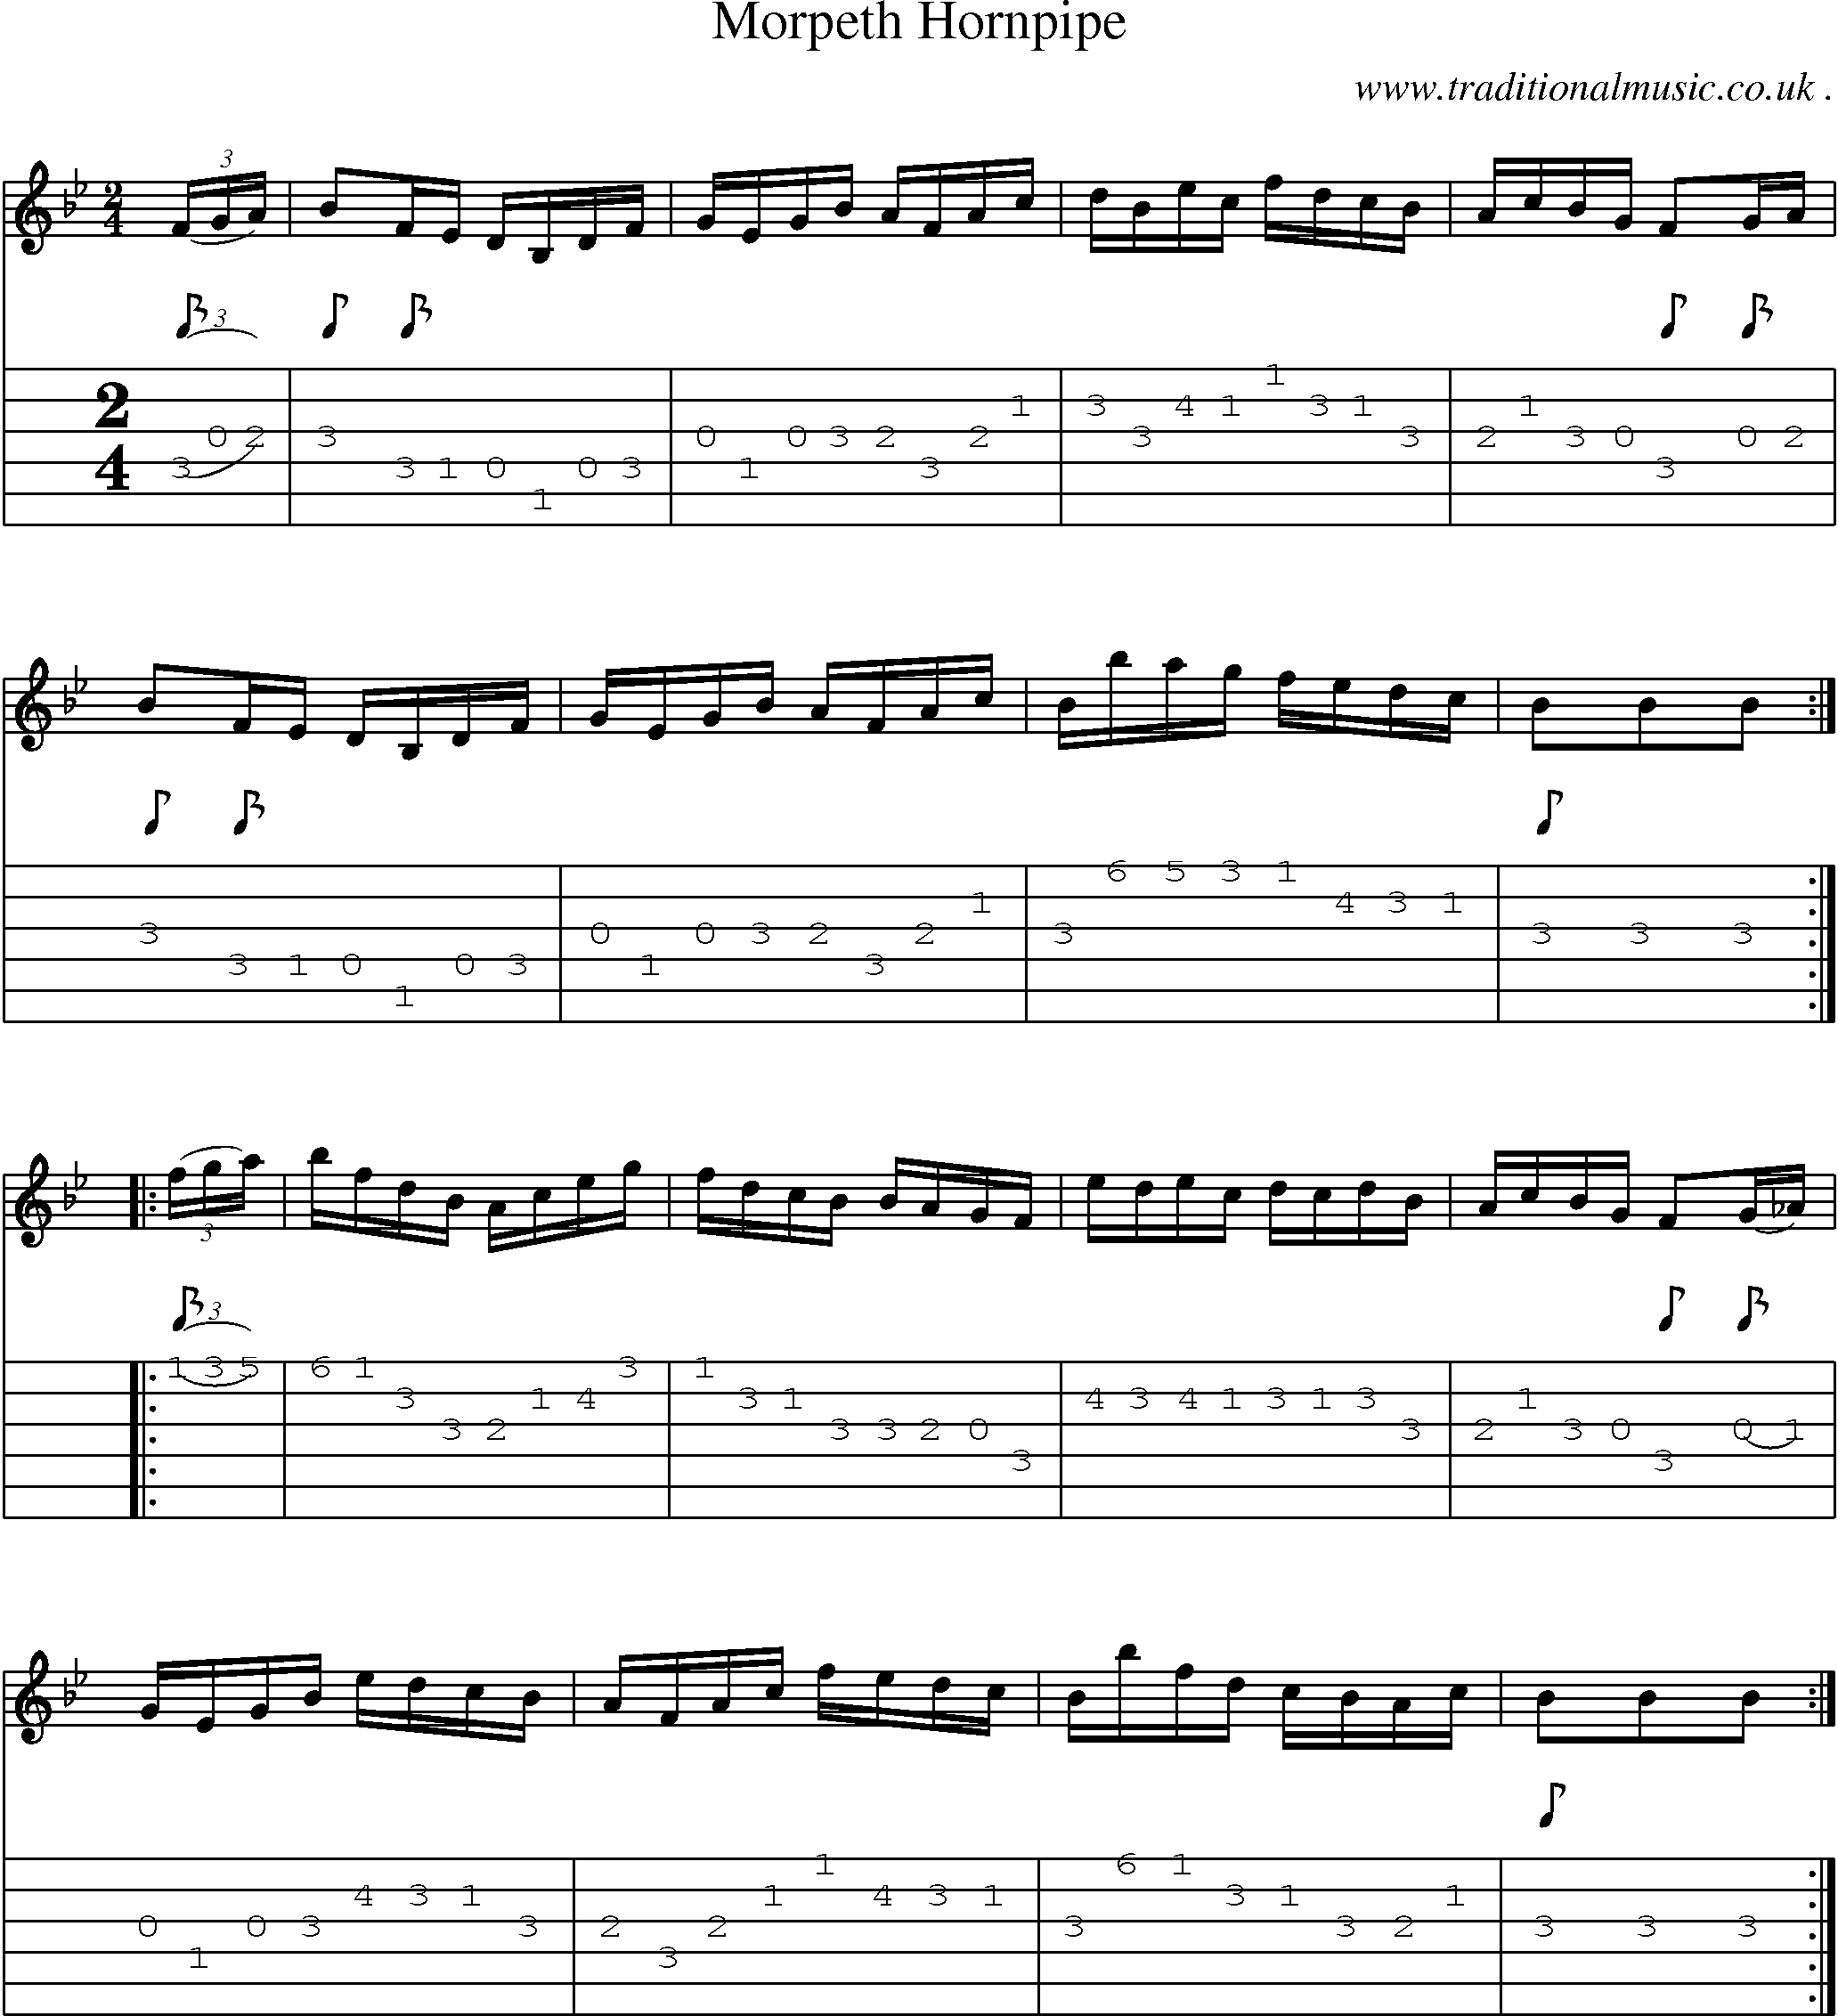 Sheet-Music and Guitar Tabs for Morpeth Hornpipe